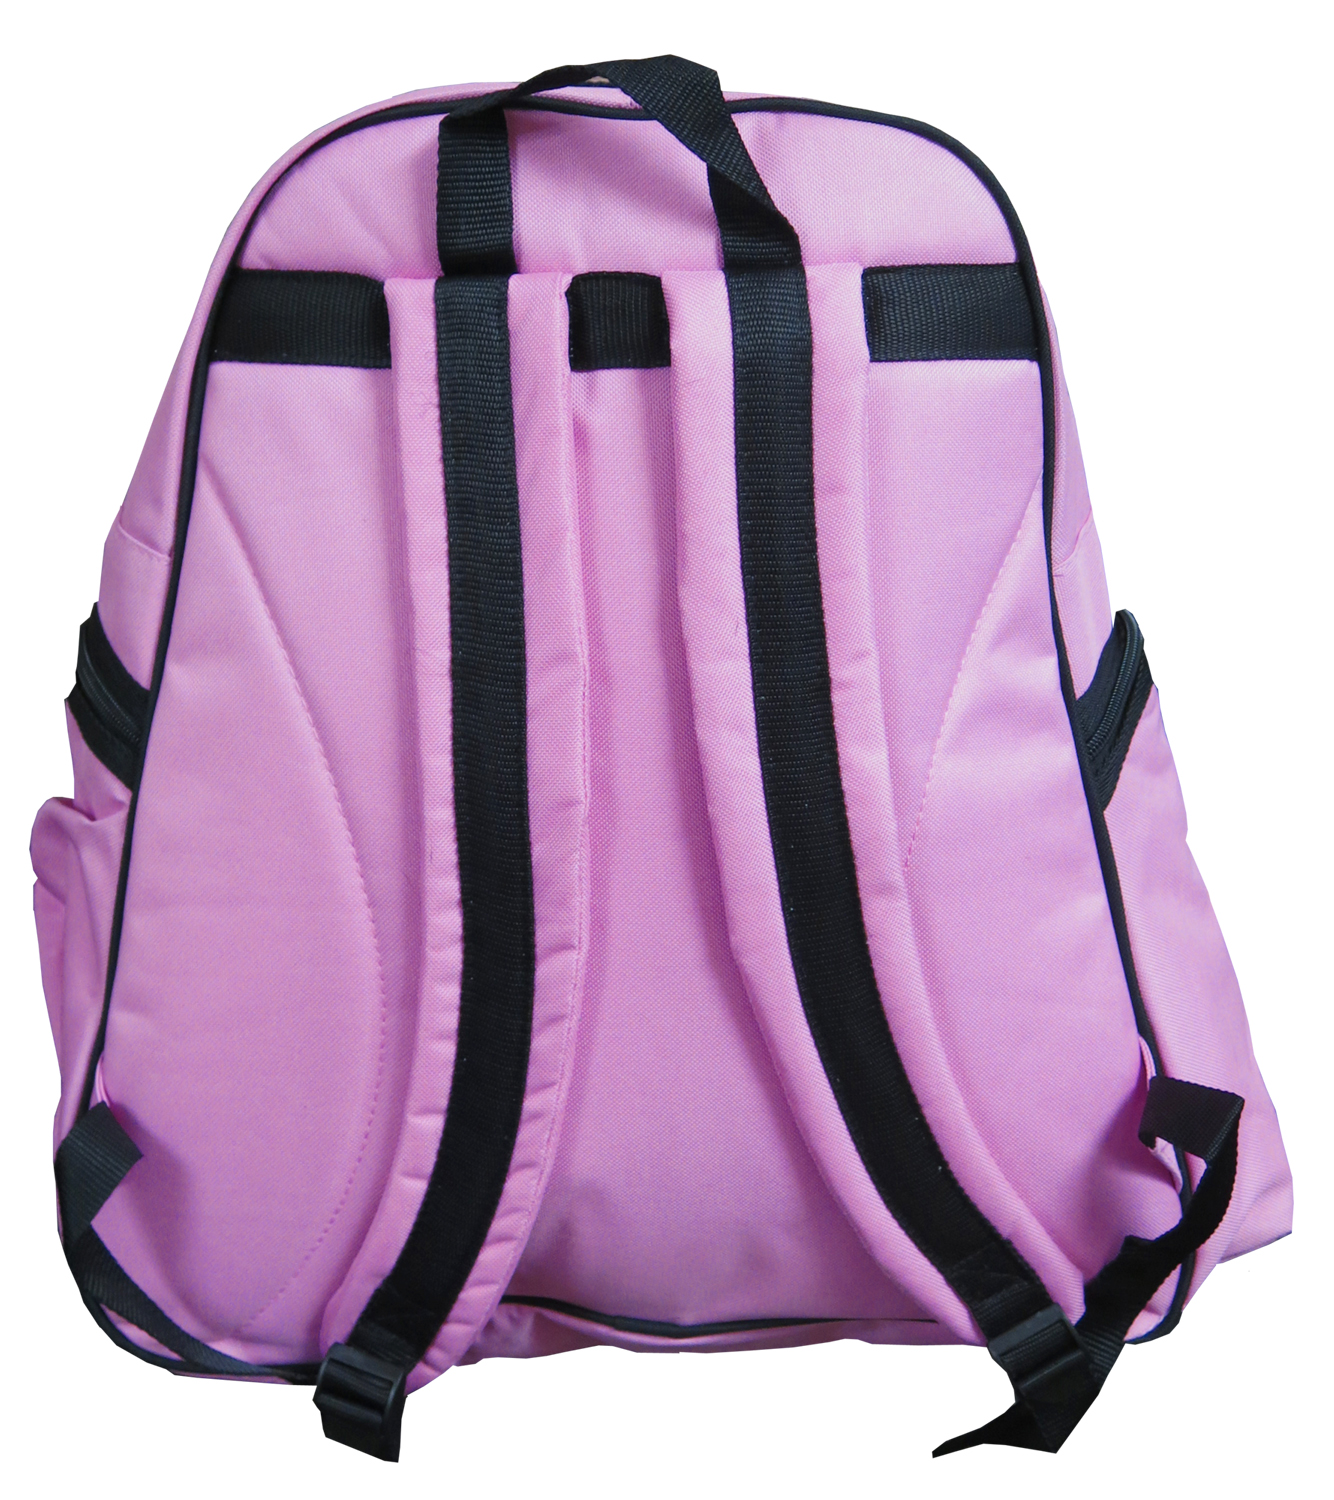 Girls Pink Ribbon Soccer Backpack or Womens Pink Ribbon Volleyball Bag - image 3 of 4